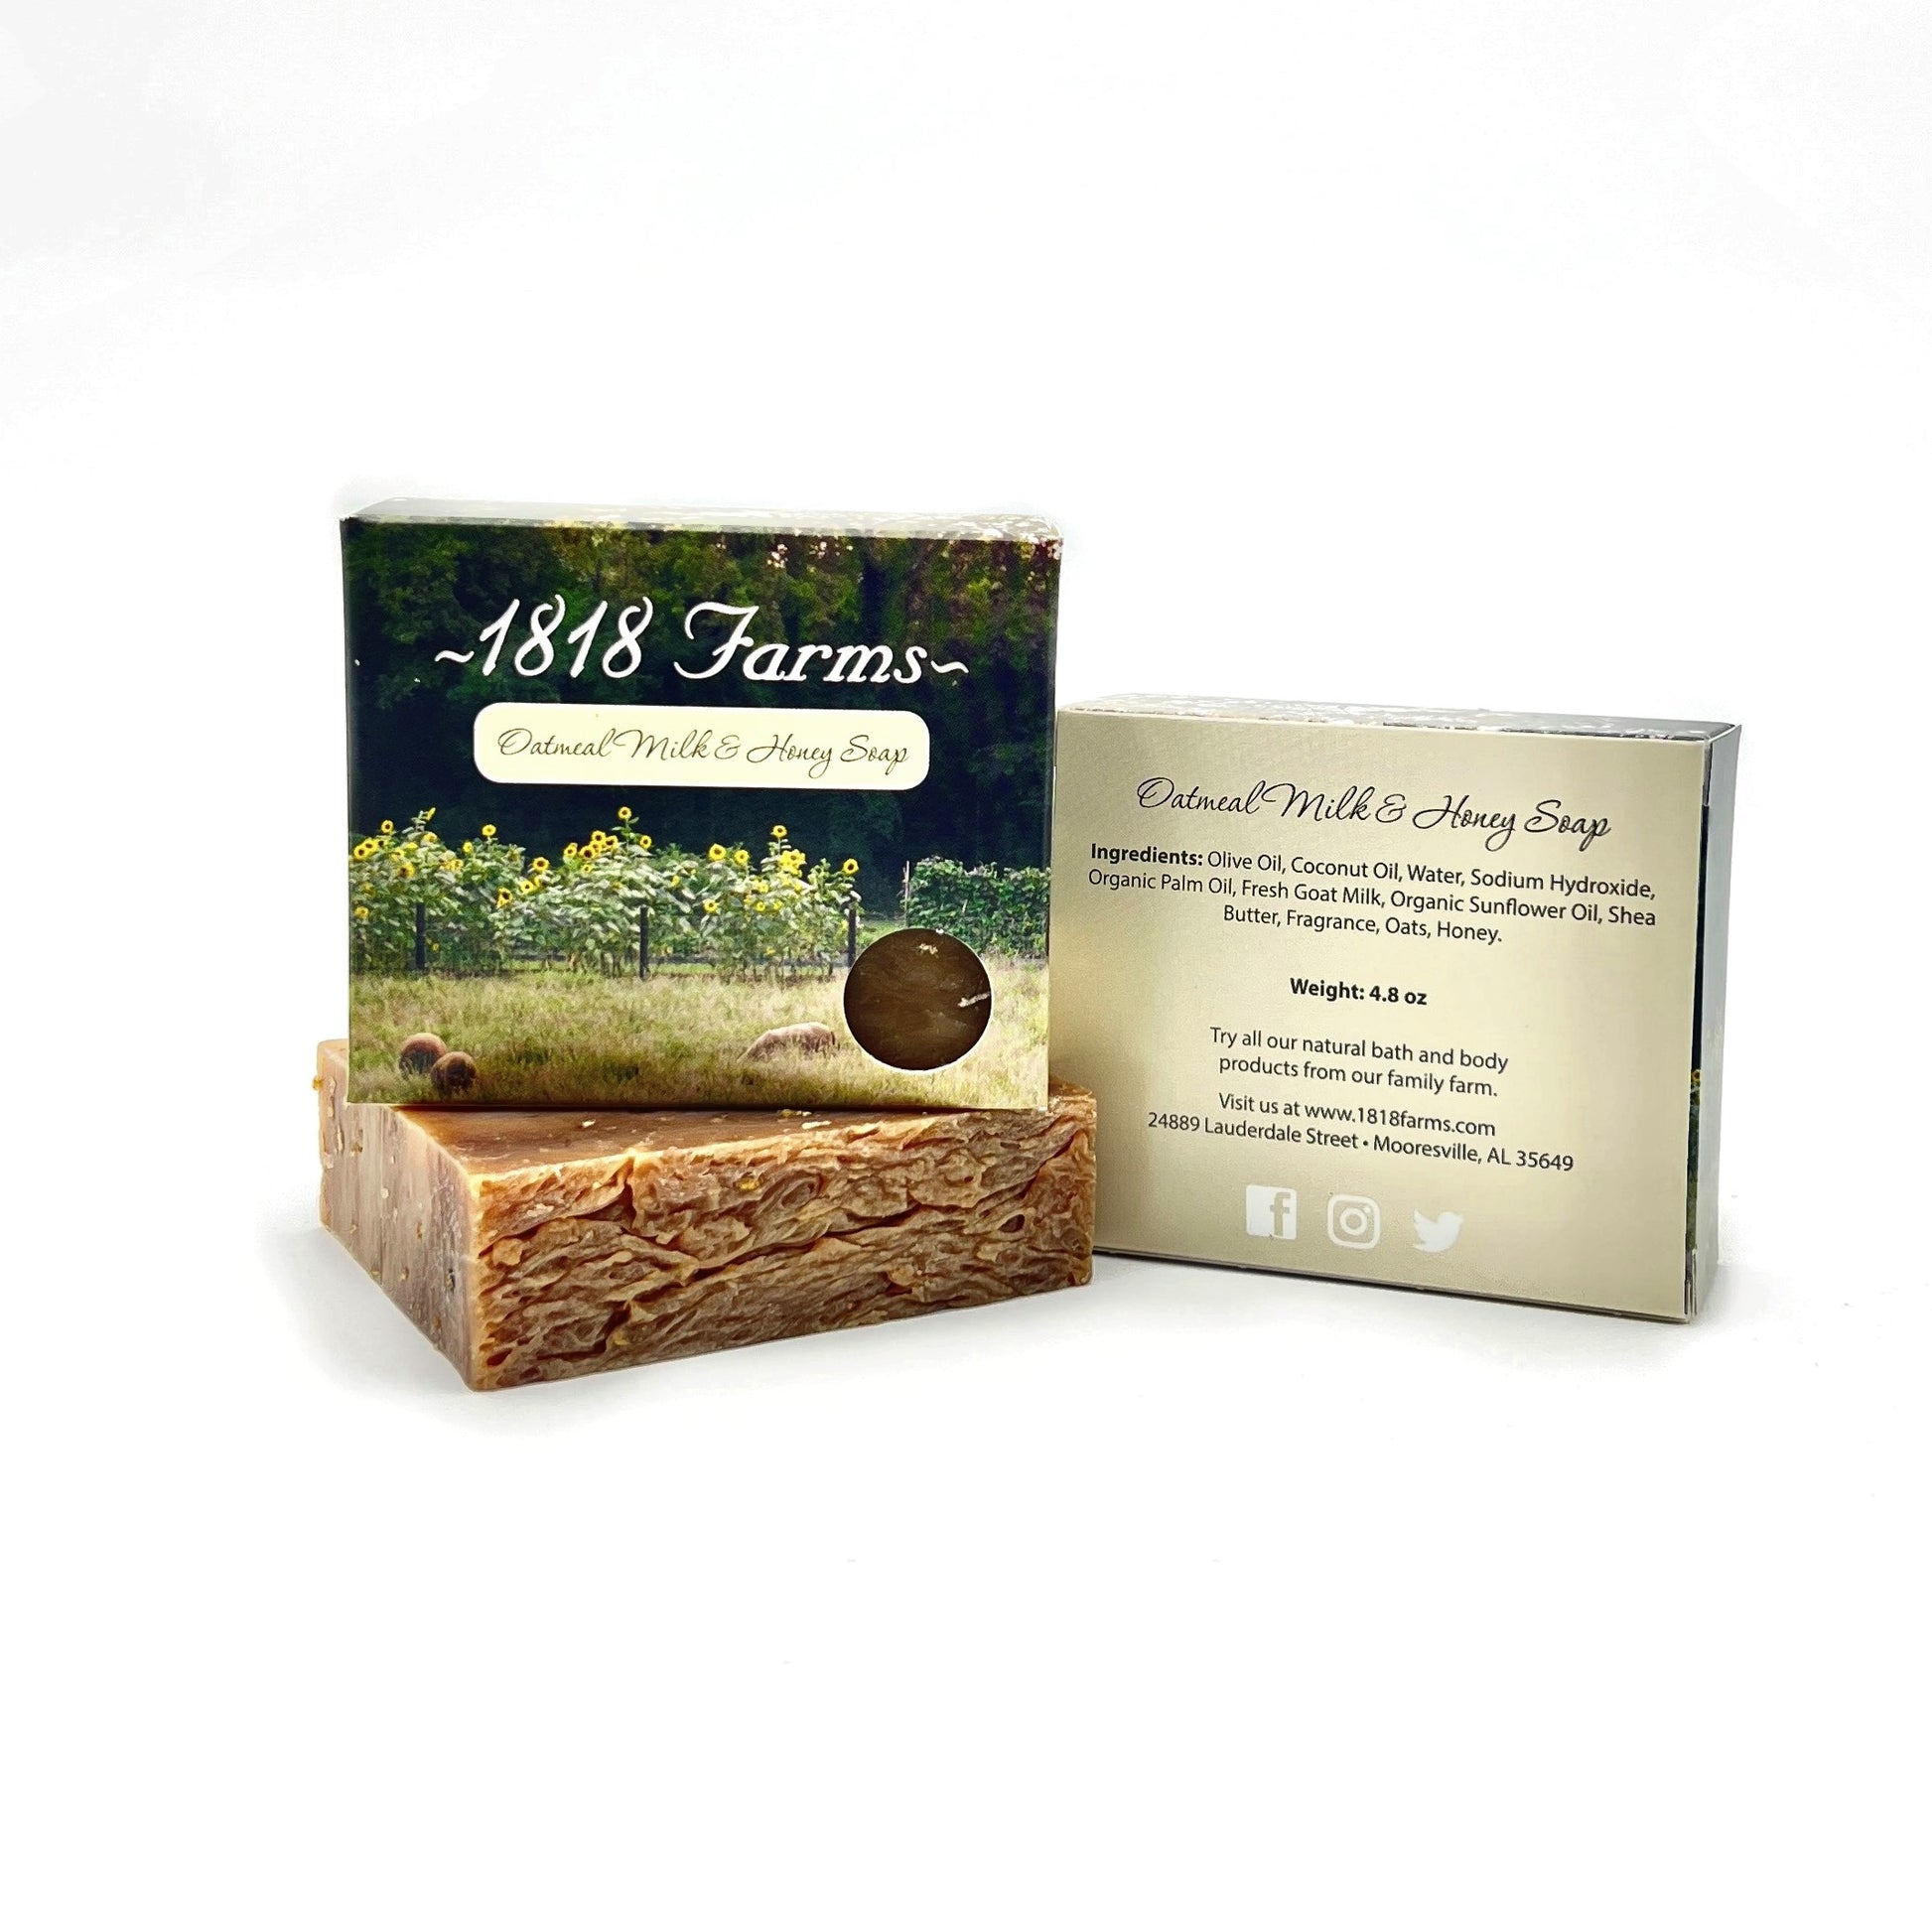 1818 Farms Select Relaxation and Self Care Gift Box Gift Basket 1818 Farms   